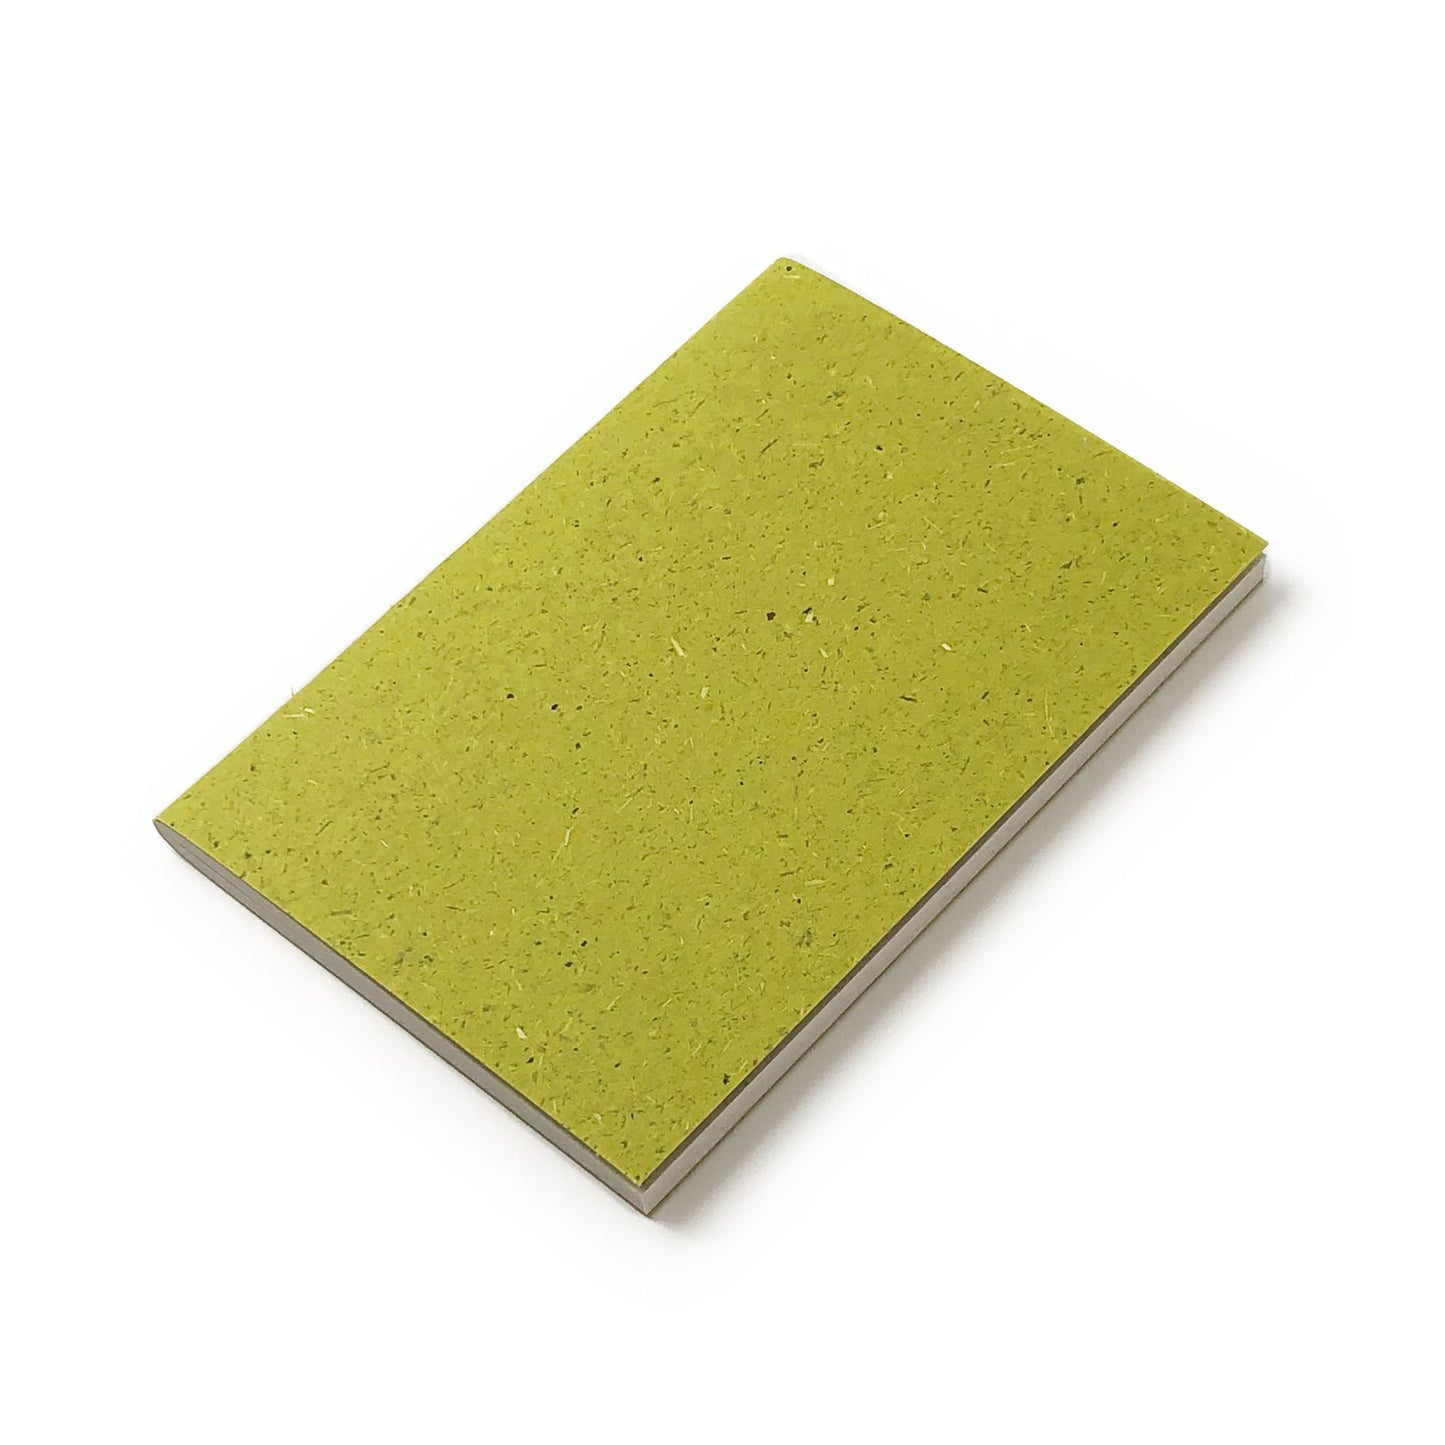 Green notebook with grass-textured cover and white pages on a white background.